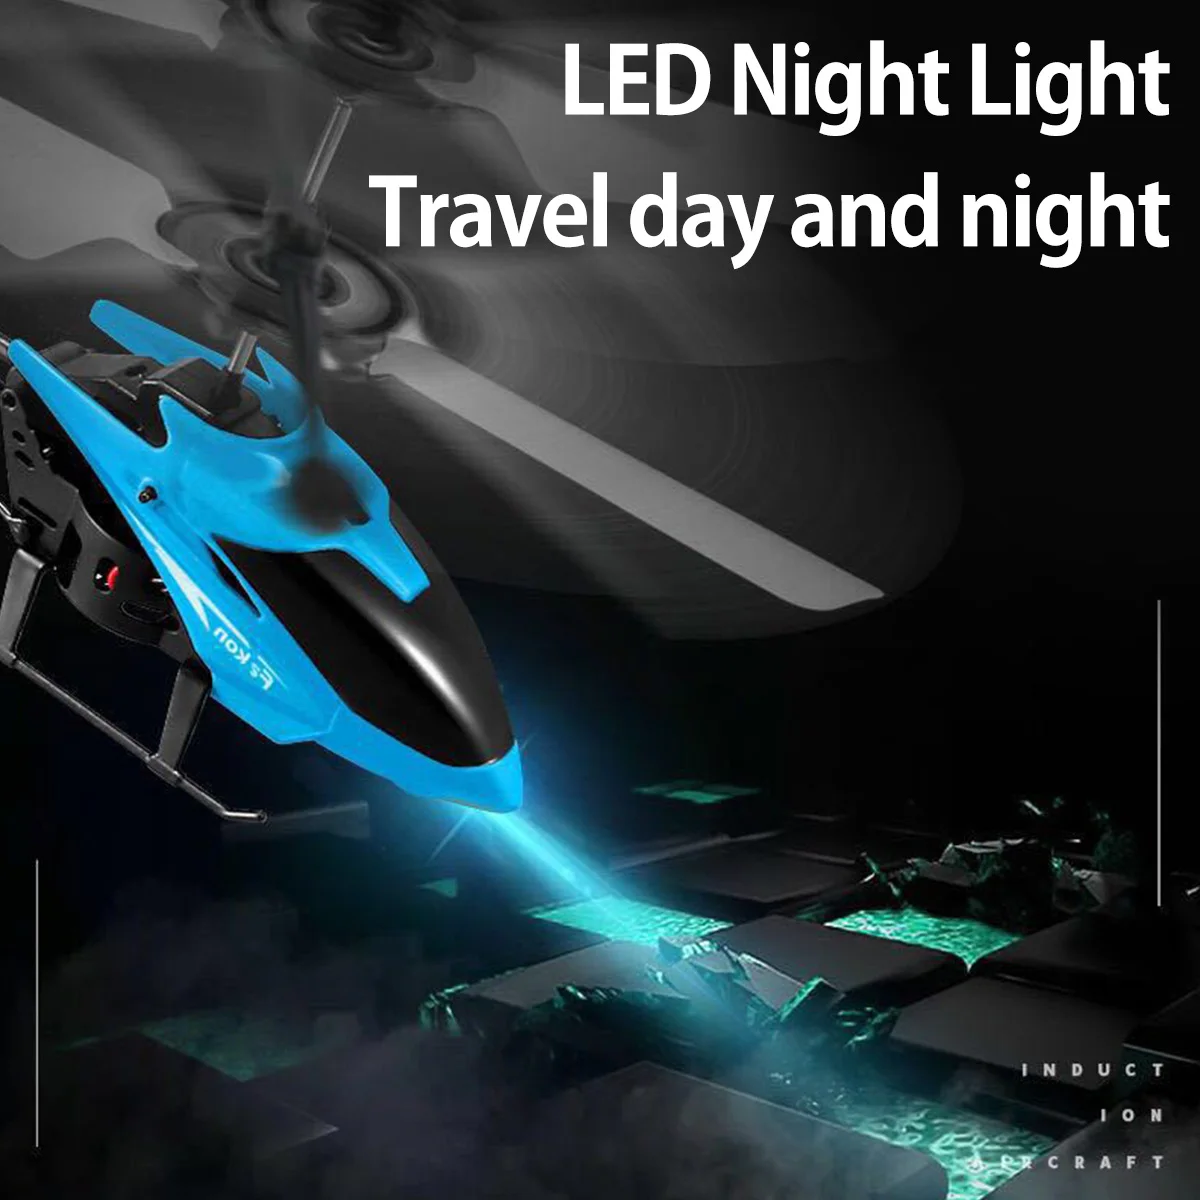 Remote Control Drone Helicopter RC Toy Aircraft Induction Hovering USB Charge Control Drone Kid Plane Toys Indoor Flight Toys 5